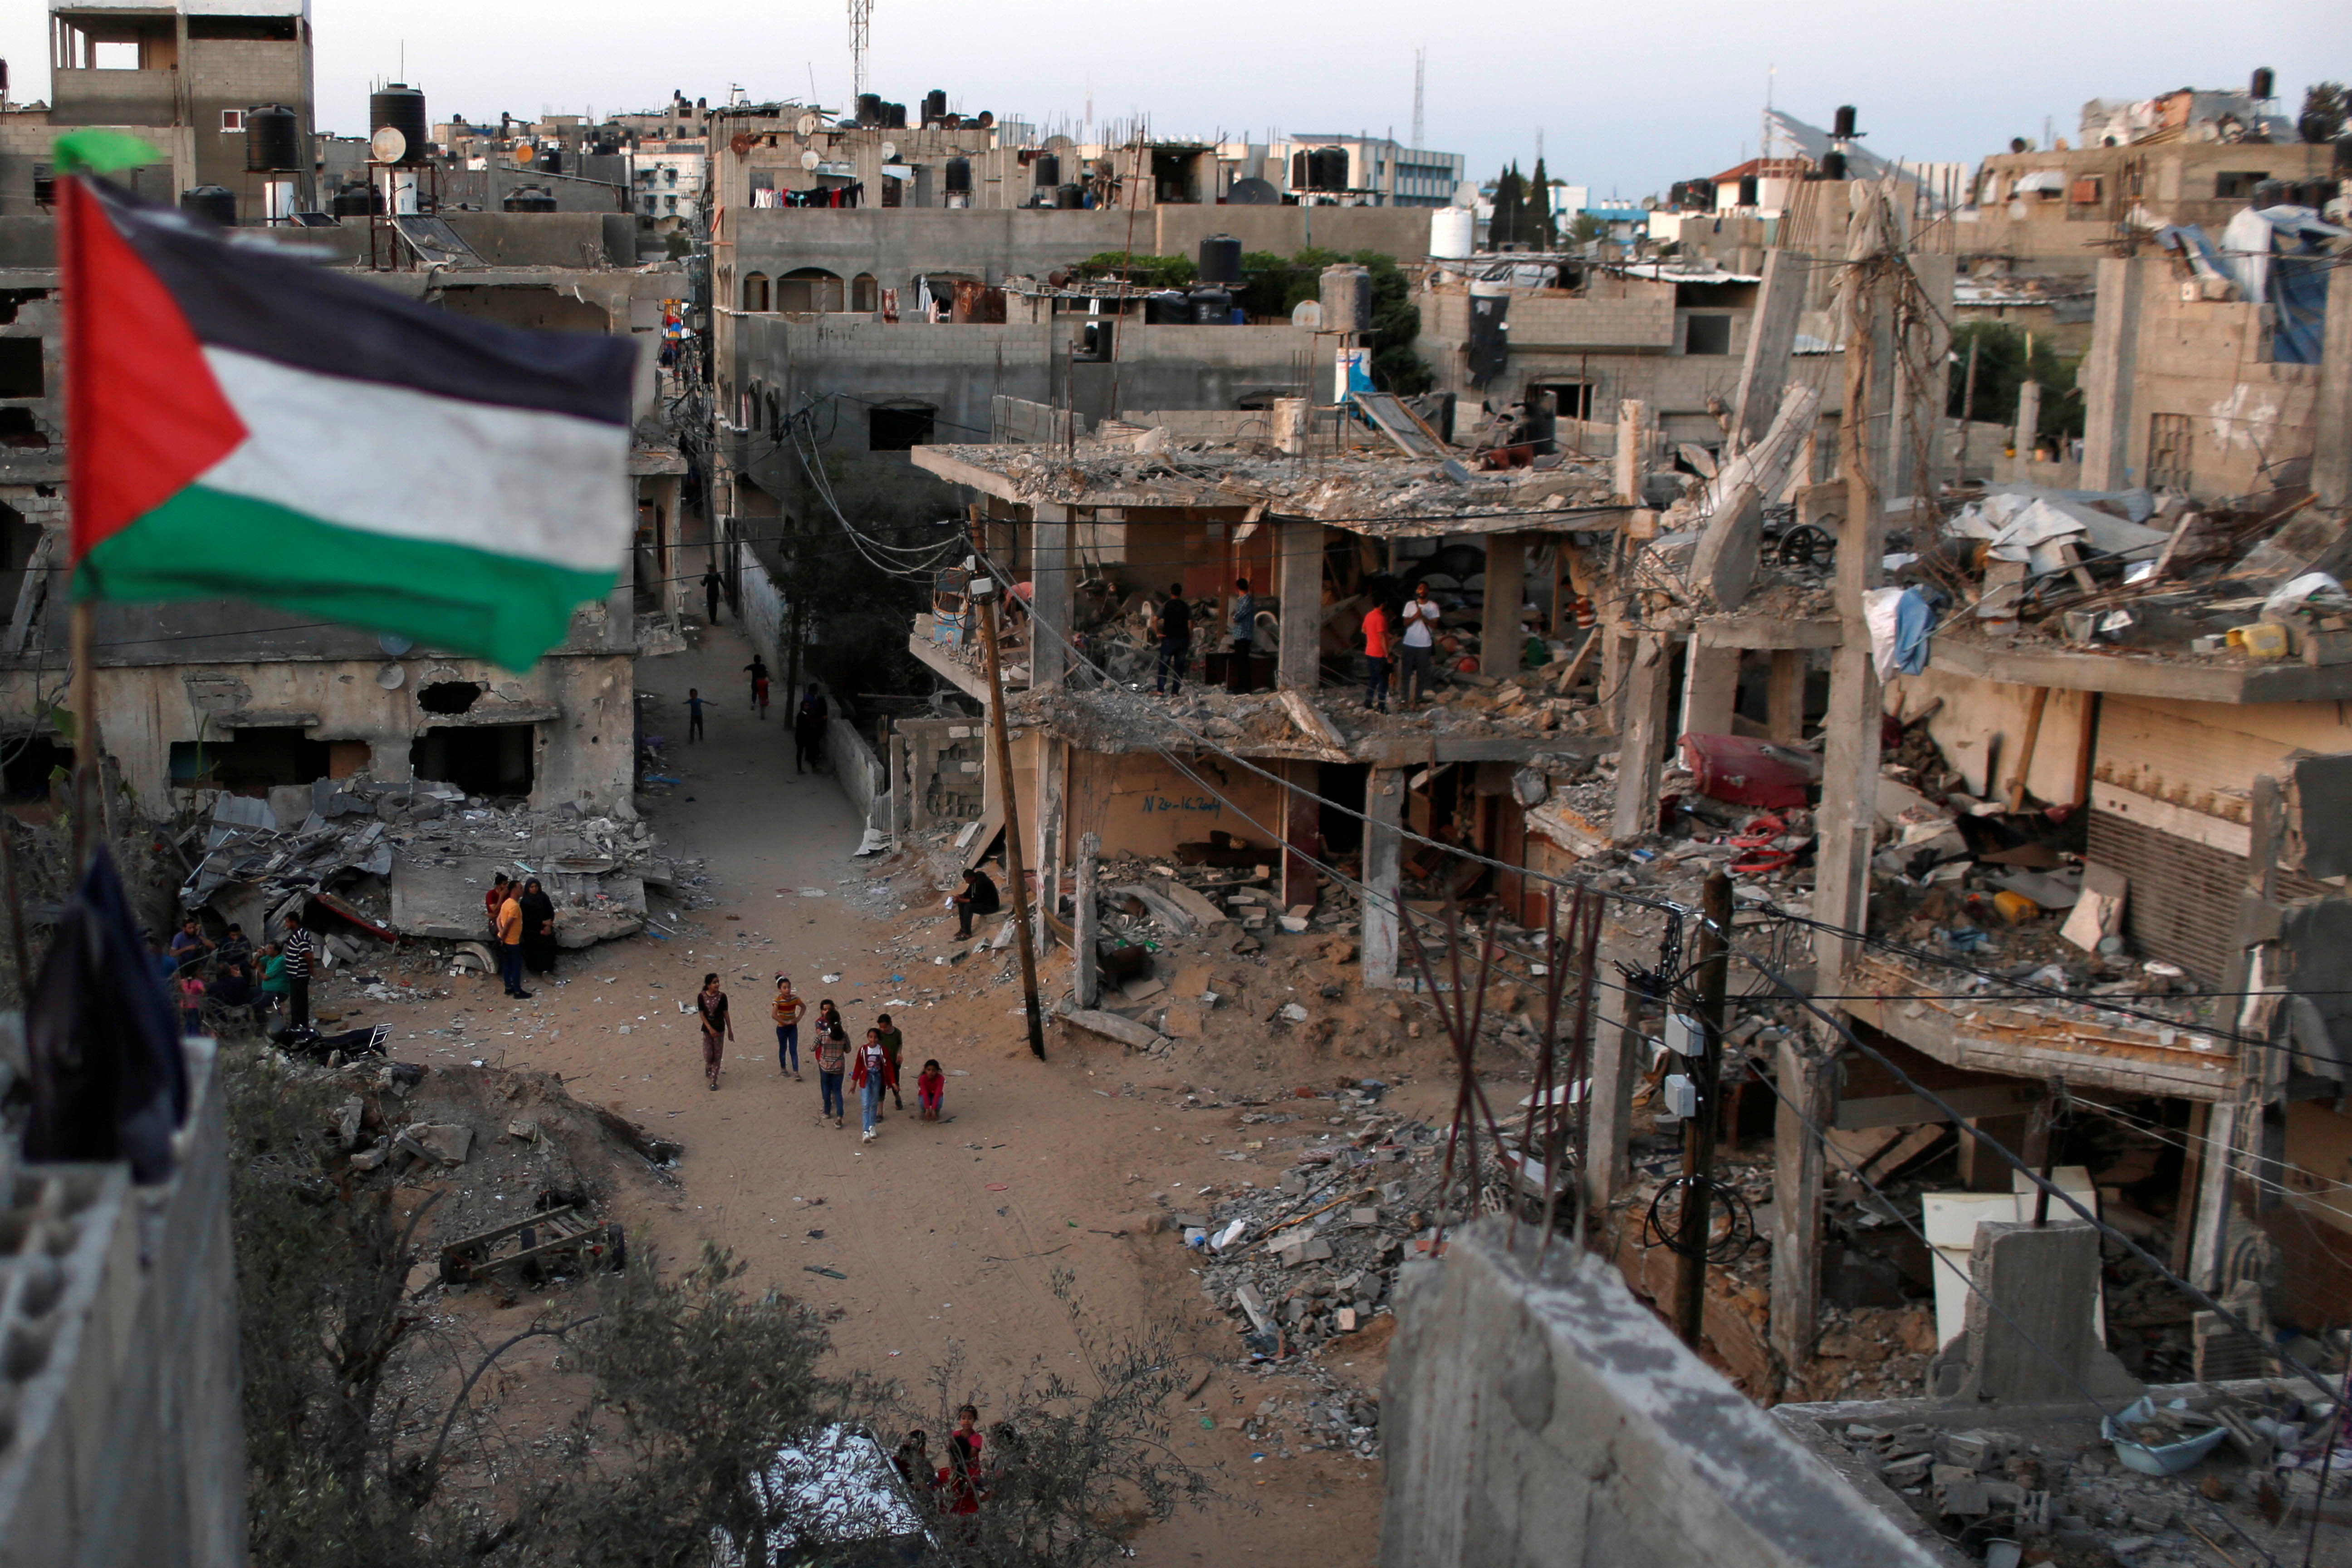 A Palestinian flag flies as the ruins of houses, which were destroyed by Israeli air strikes during the Israeli-Palestinian fighting, are seen, in Gaza